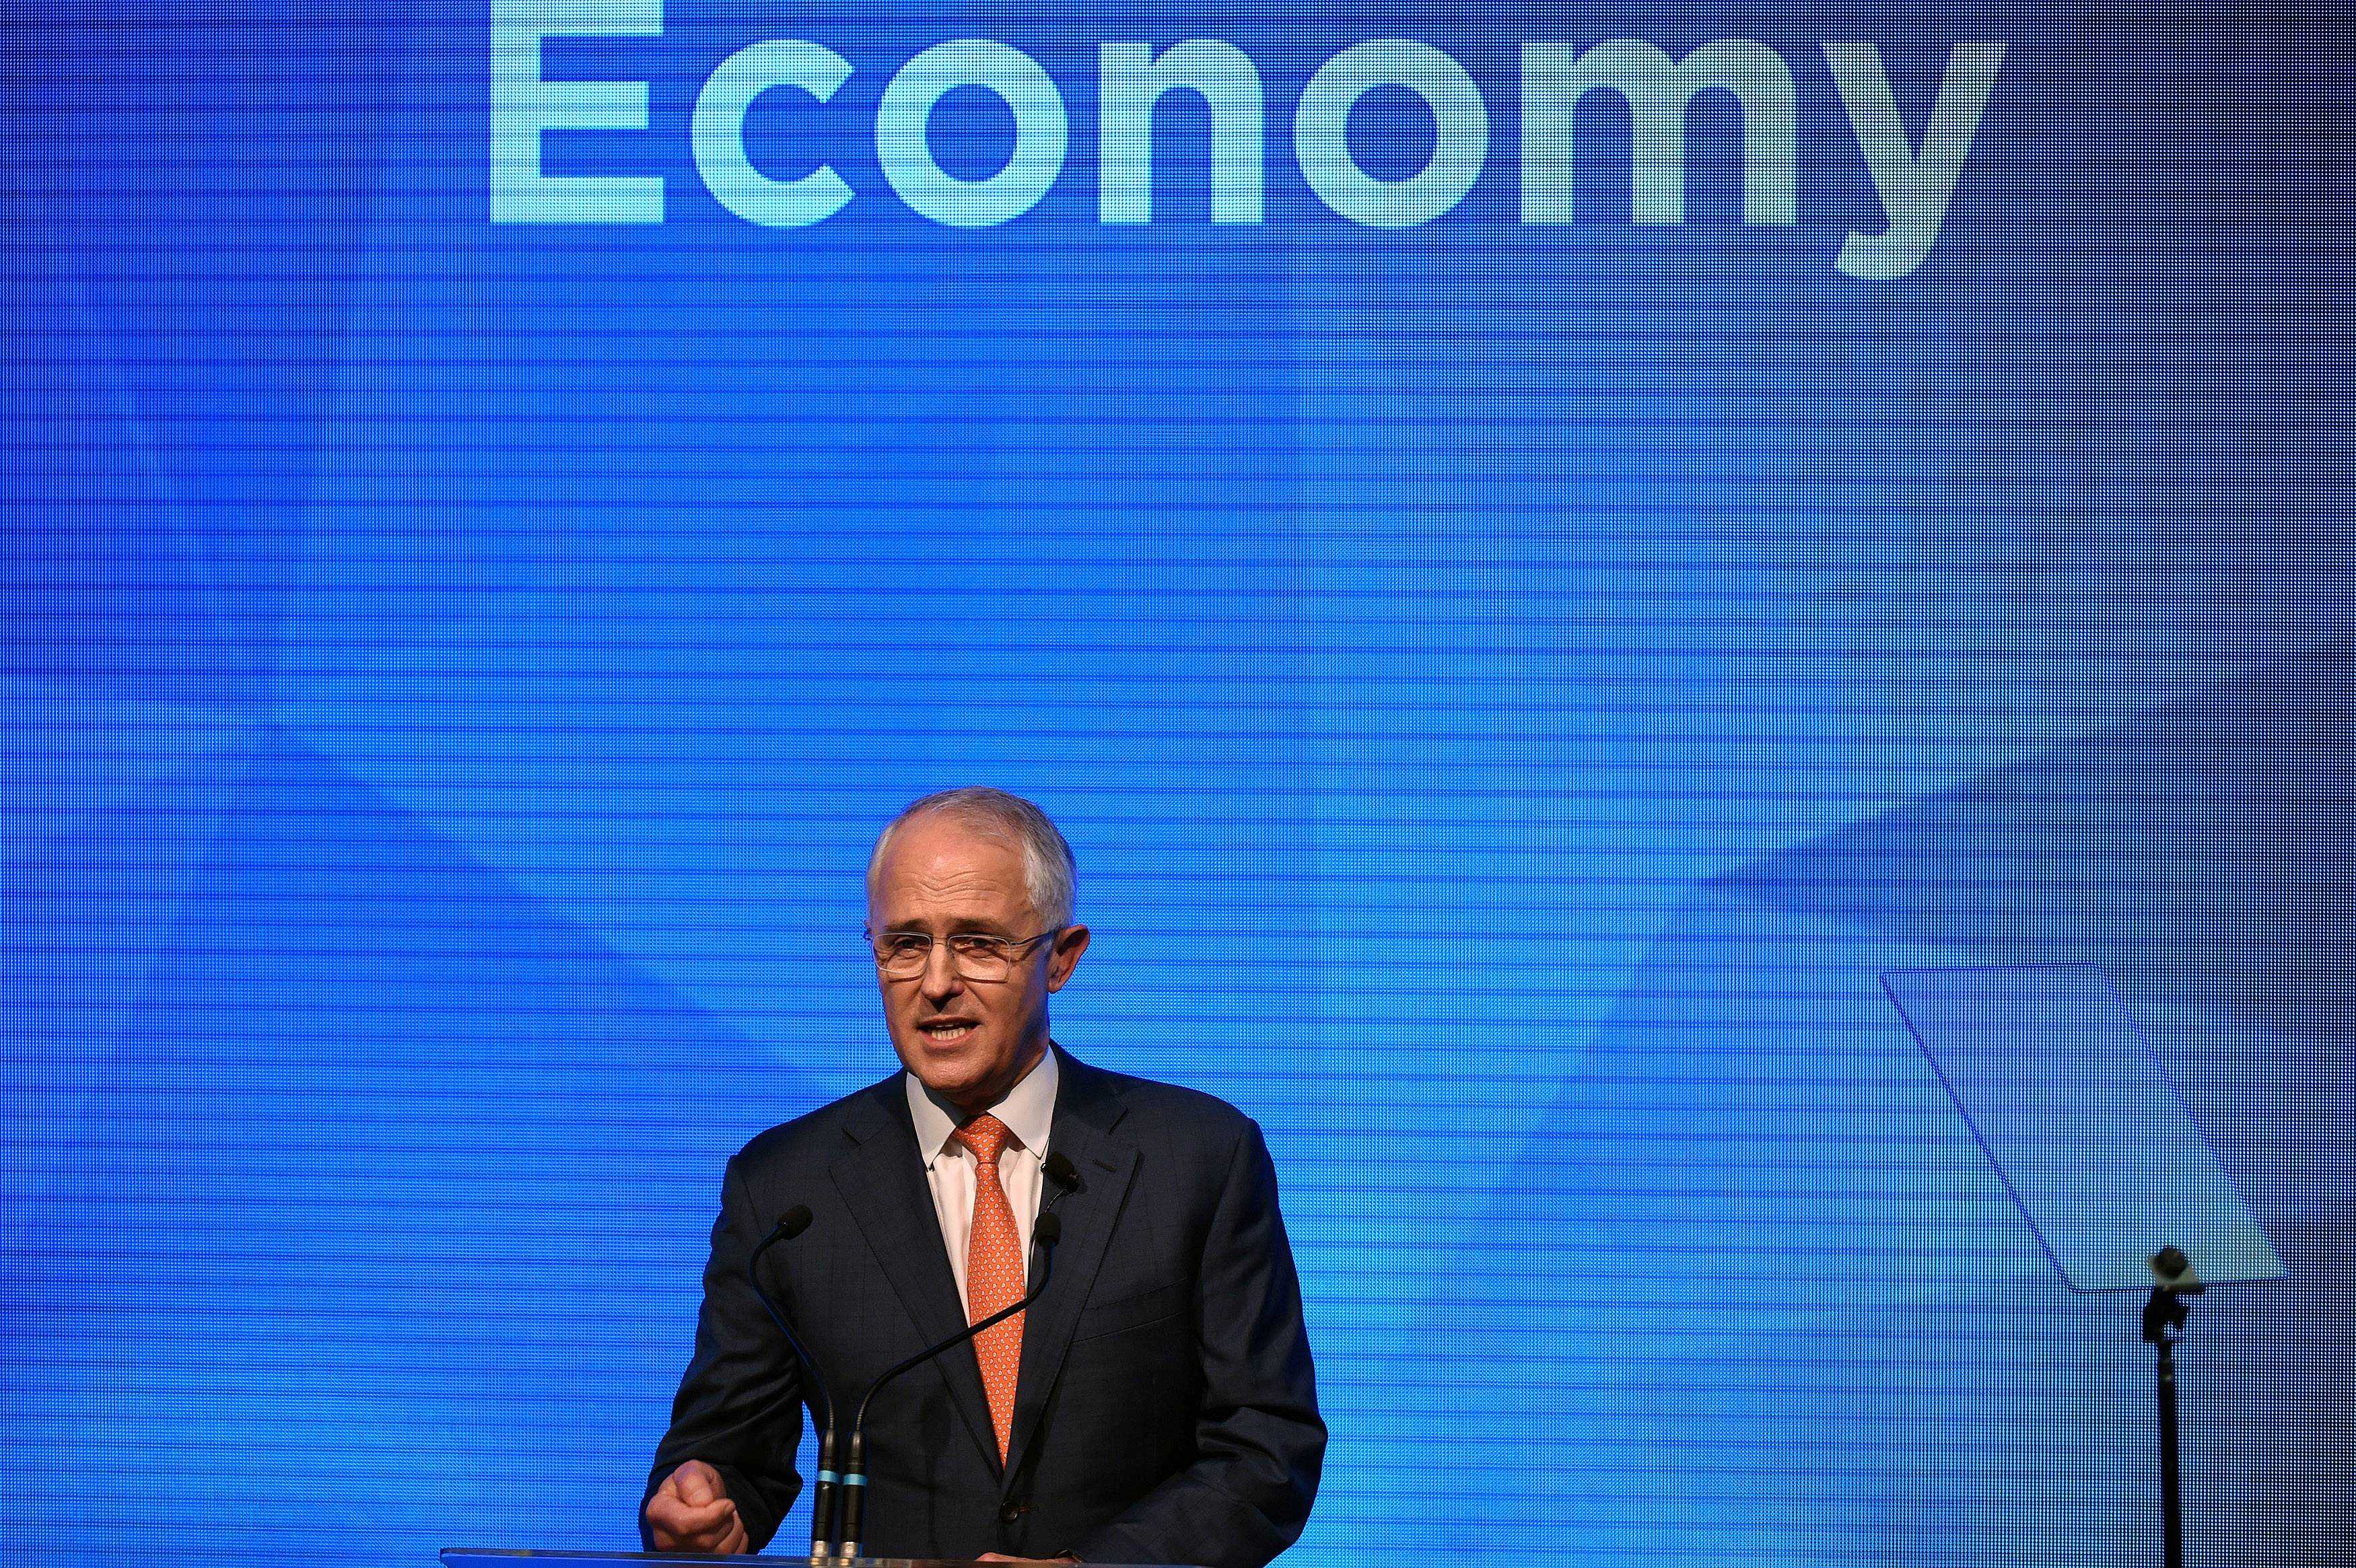 Australian Prime Minister Malcolm Turnbull addresses the Coalition Campaign launch in Sydney on June 26, 2016.  Turnbull used the chaos from Brexit to make a pitch for Australians to re-elect his coalition government, promising stability and strong economic leadership a week out from national polls to be held on July 2.  / AFP PHOTO / SAEED KHAN